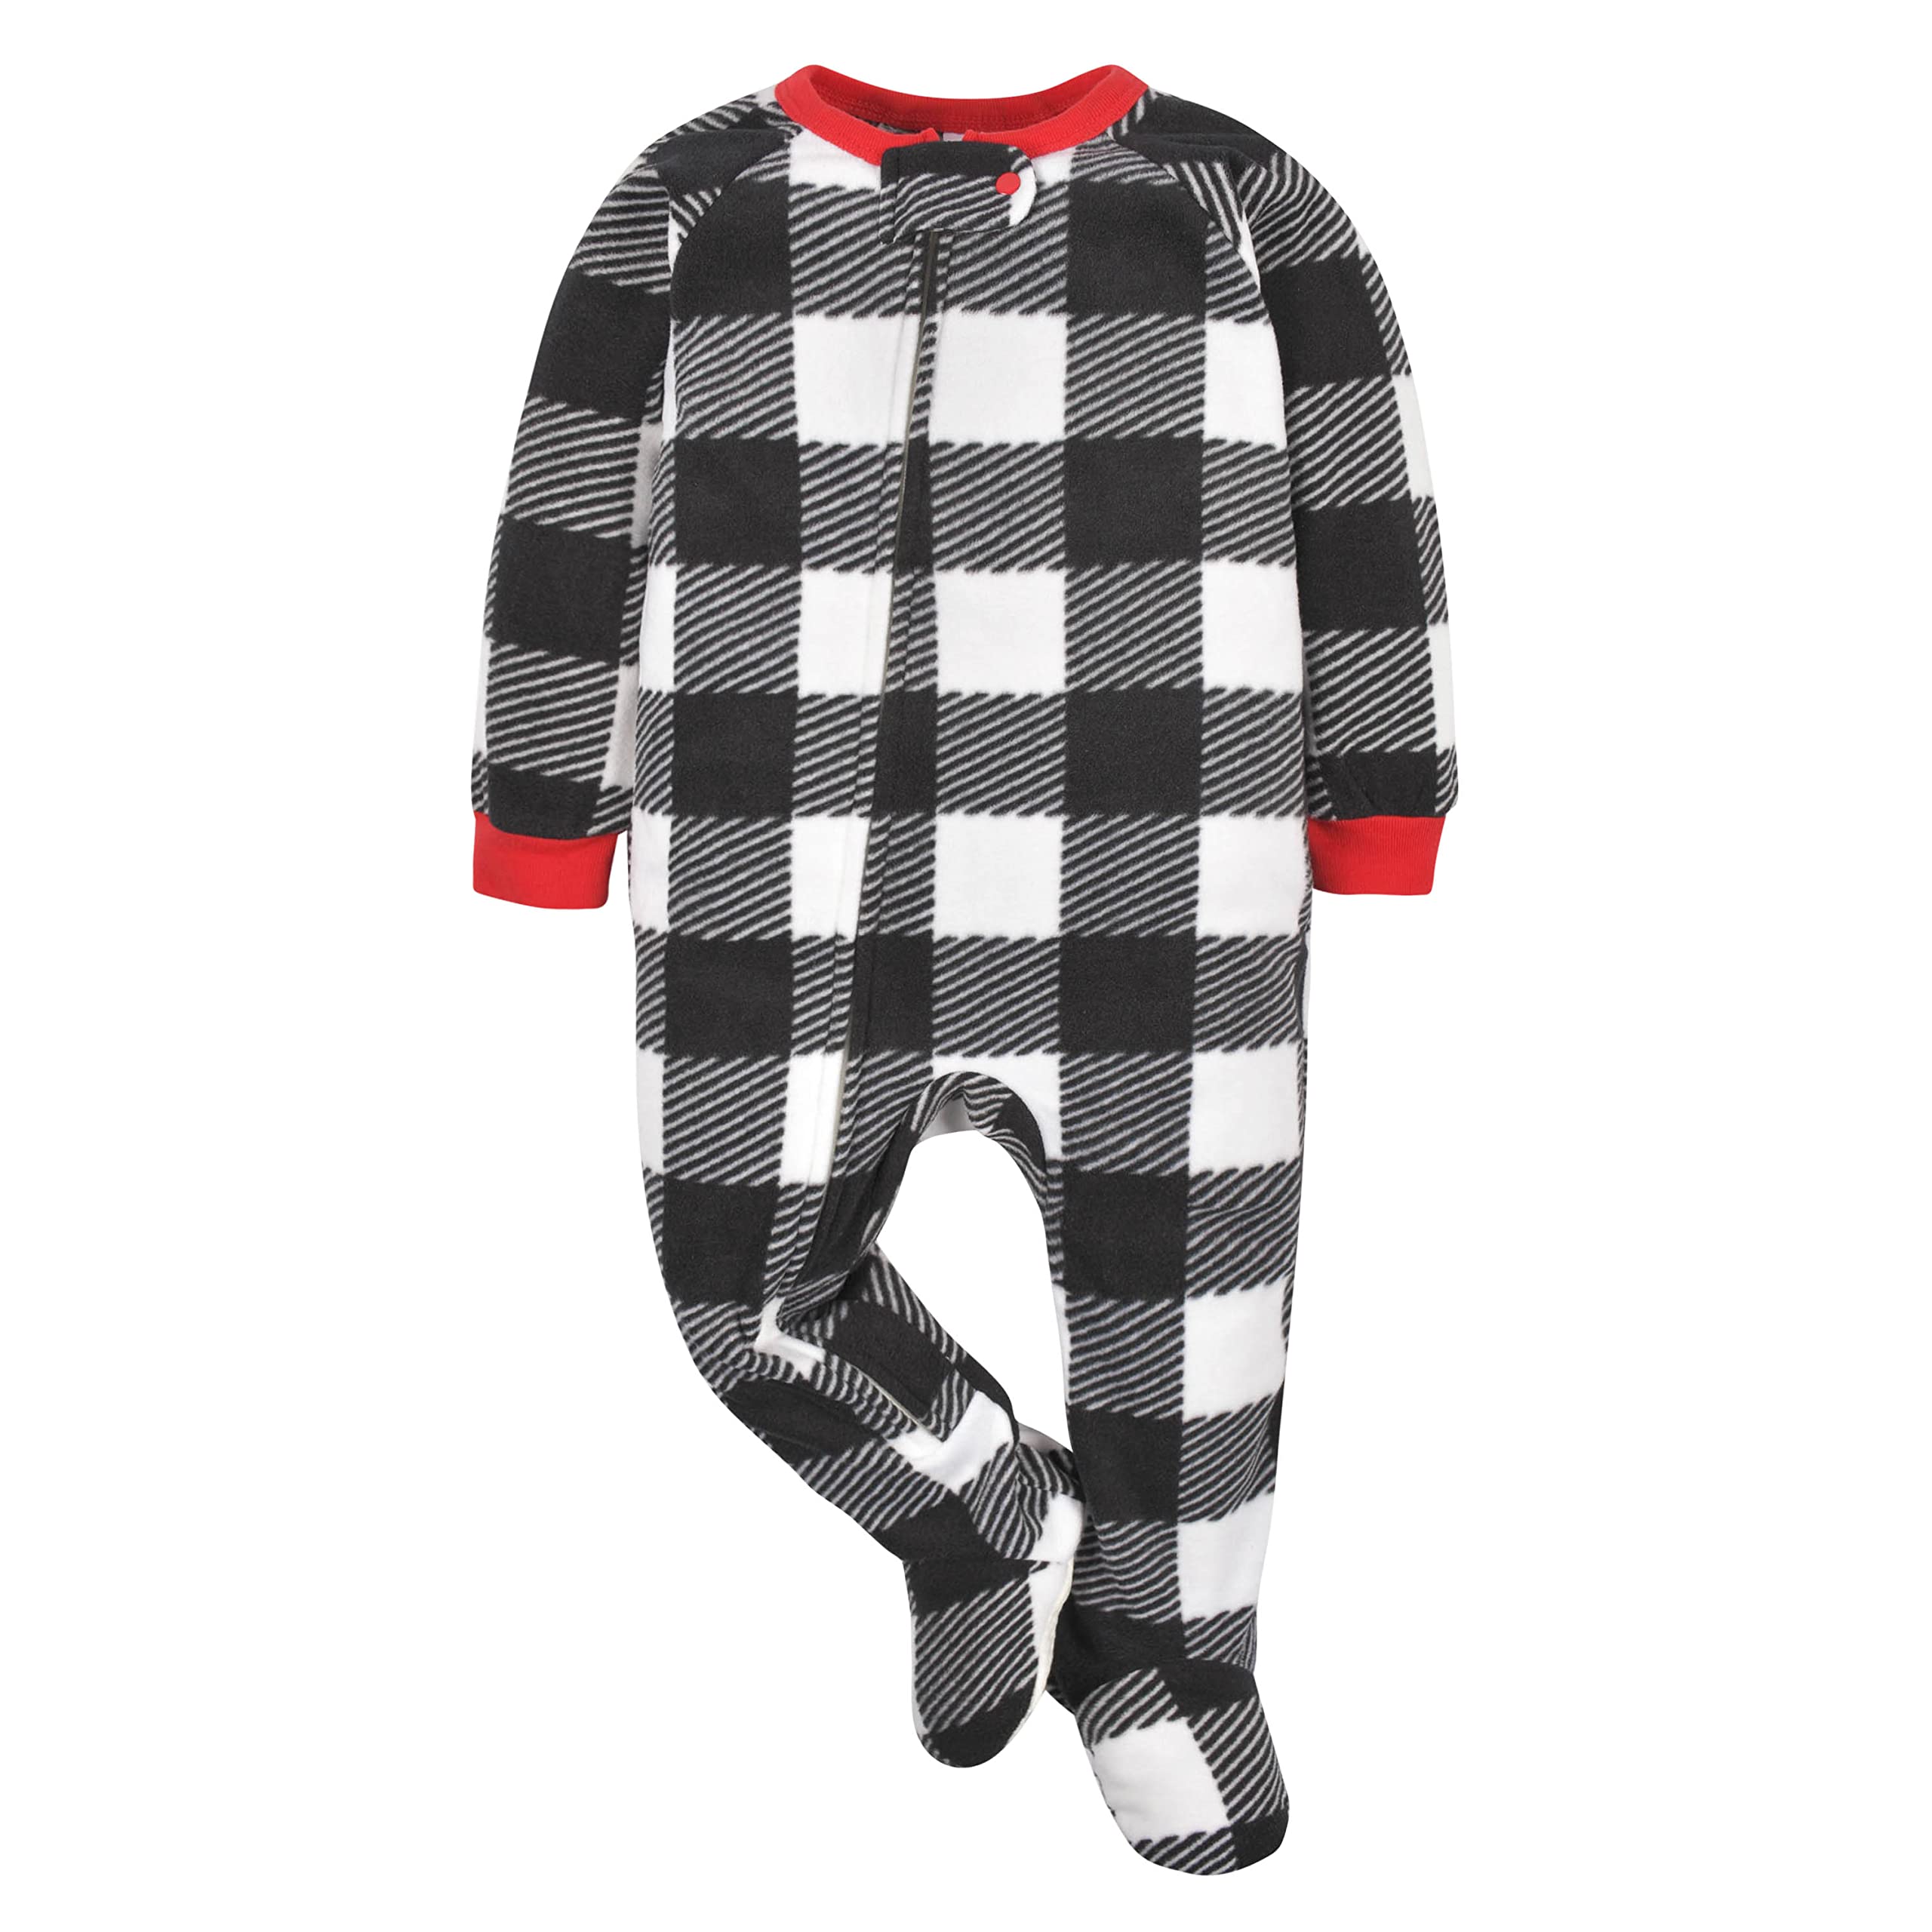 Gerber Unisex Baby Toddler Flame Resistant Fleece Footed Holiday Pajamas 2-Pack